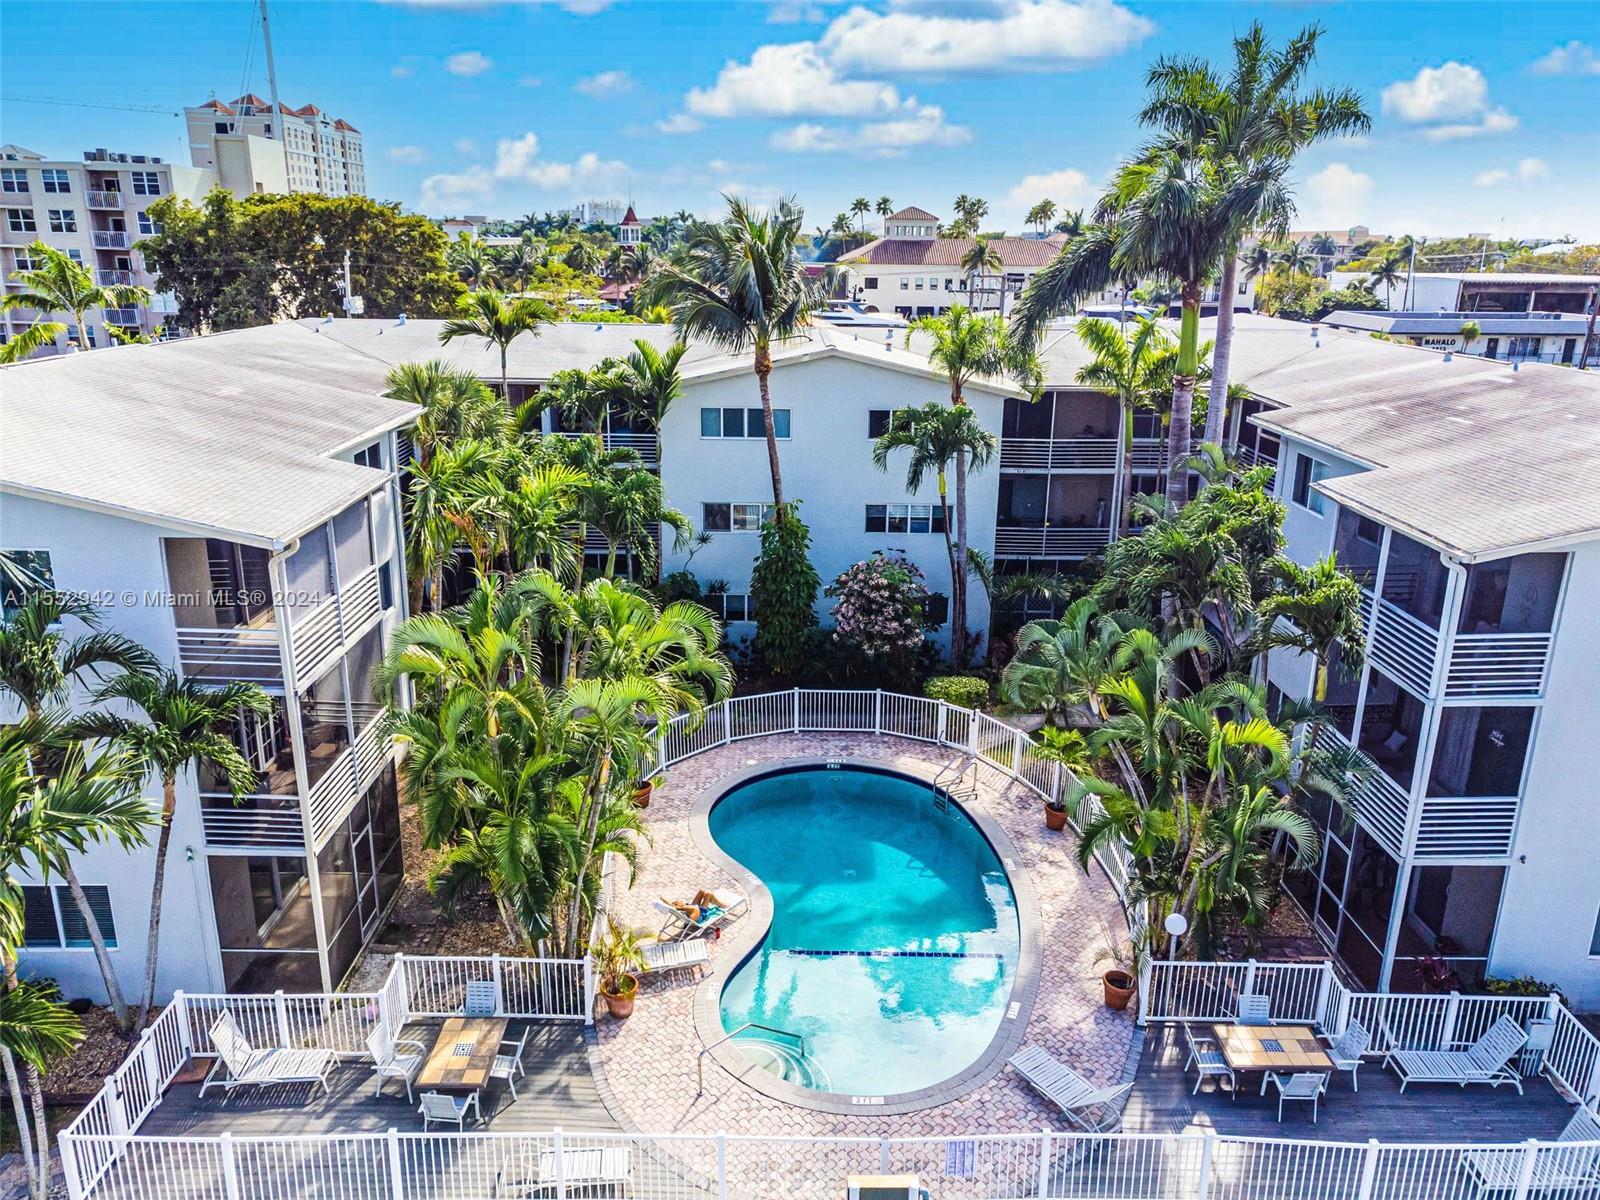 Photo of 1535 SE 15th St #206 in Fort Lauderdale, FL